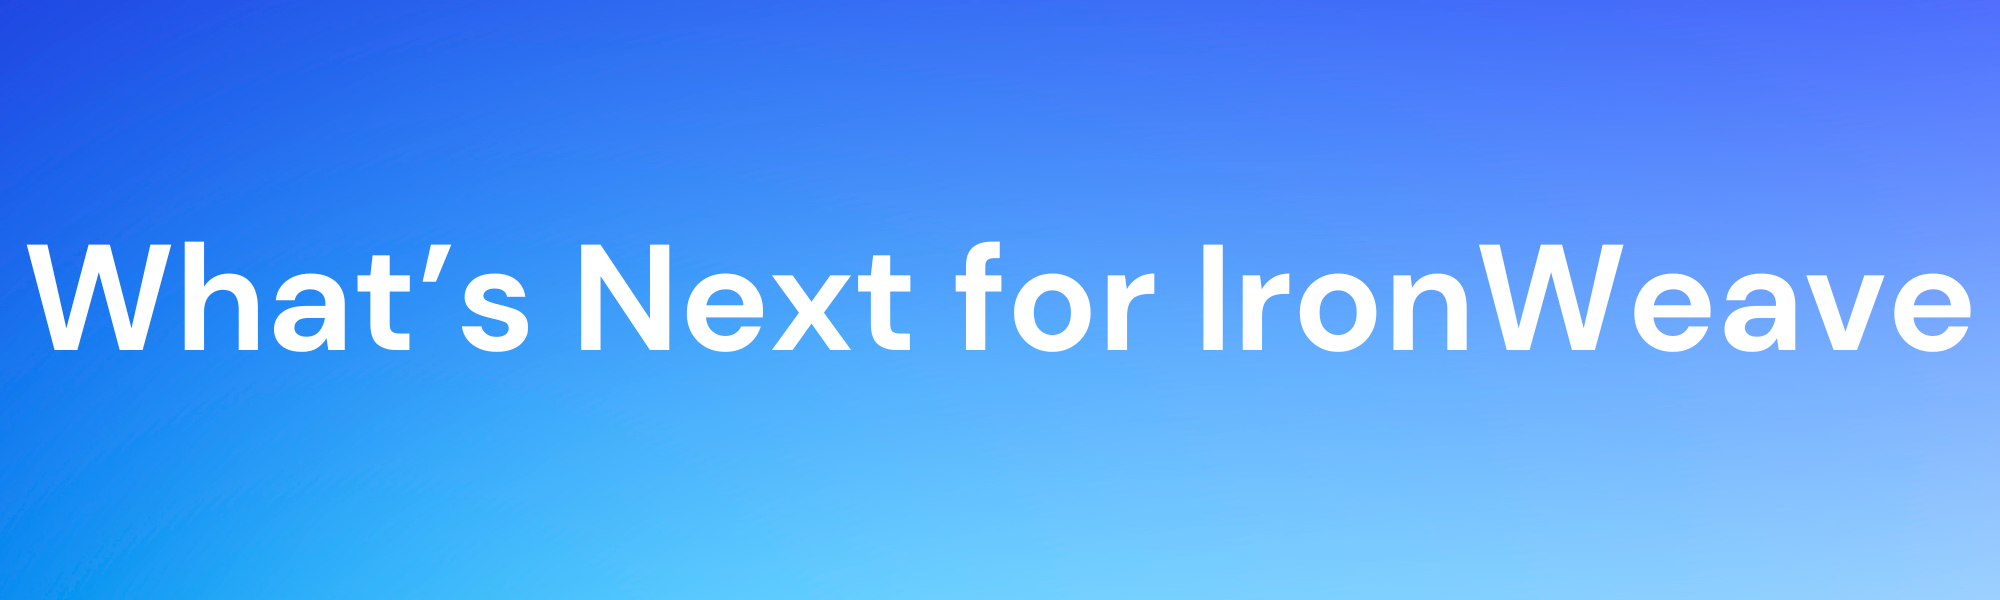 Image text: What's Next for IronWeave